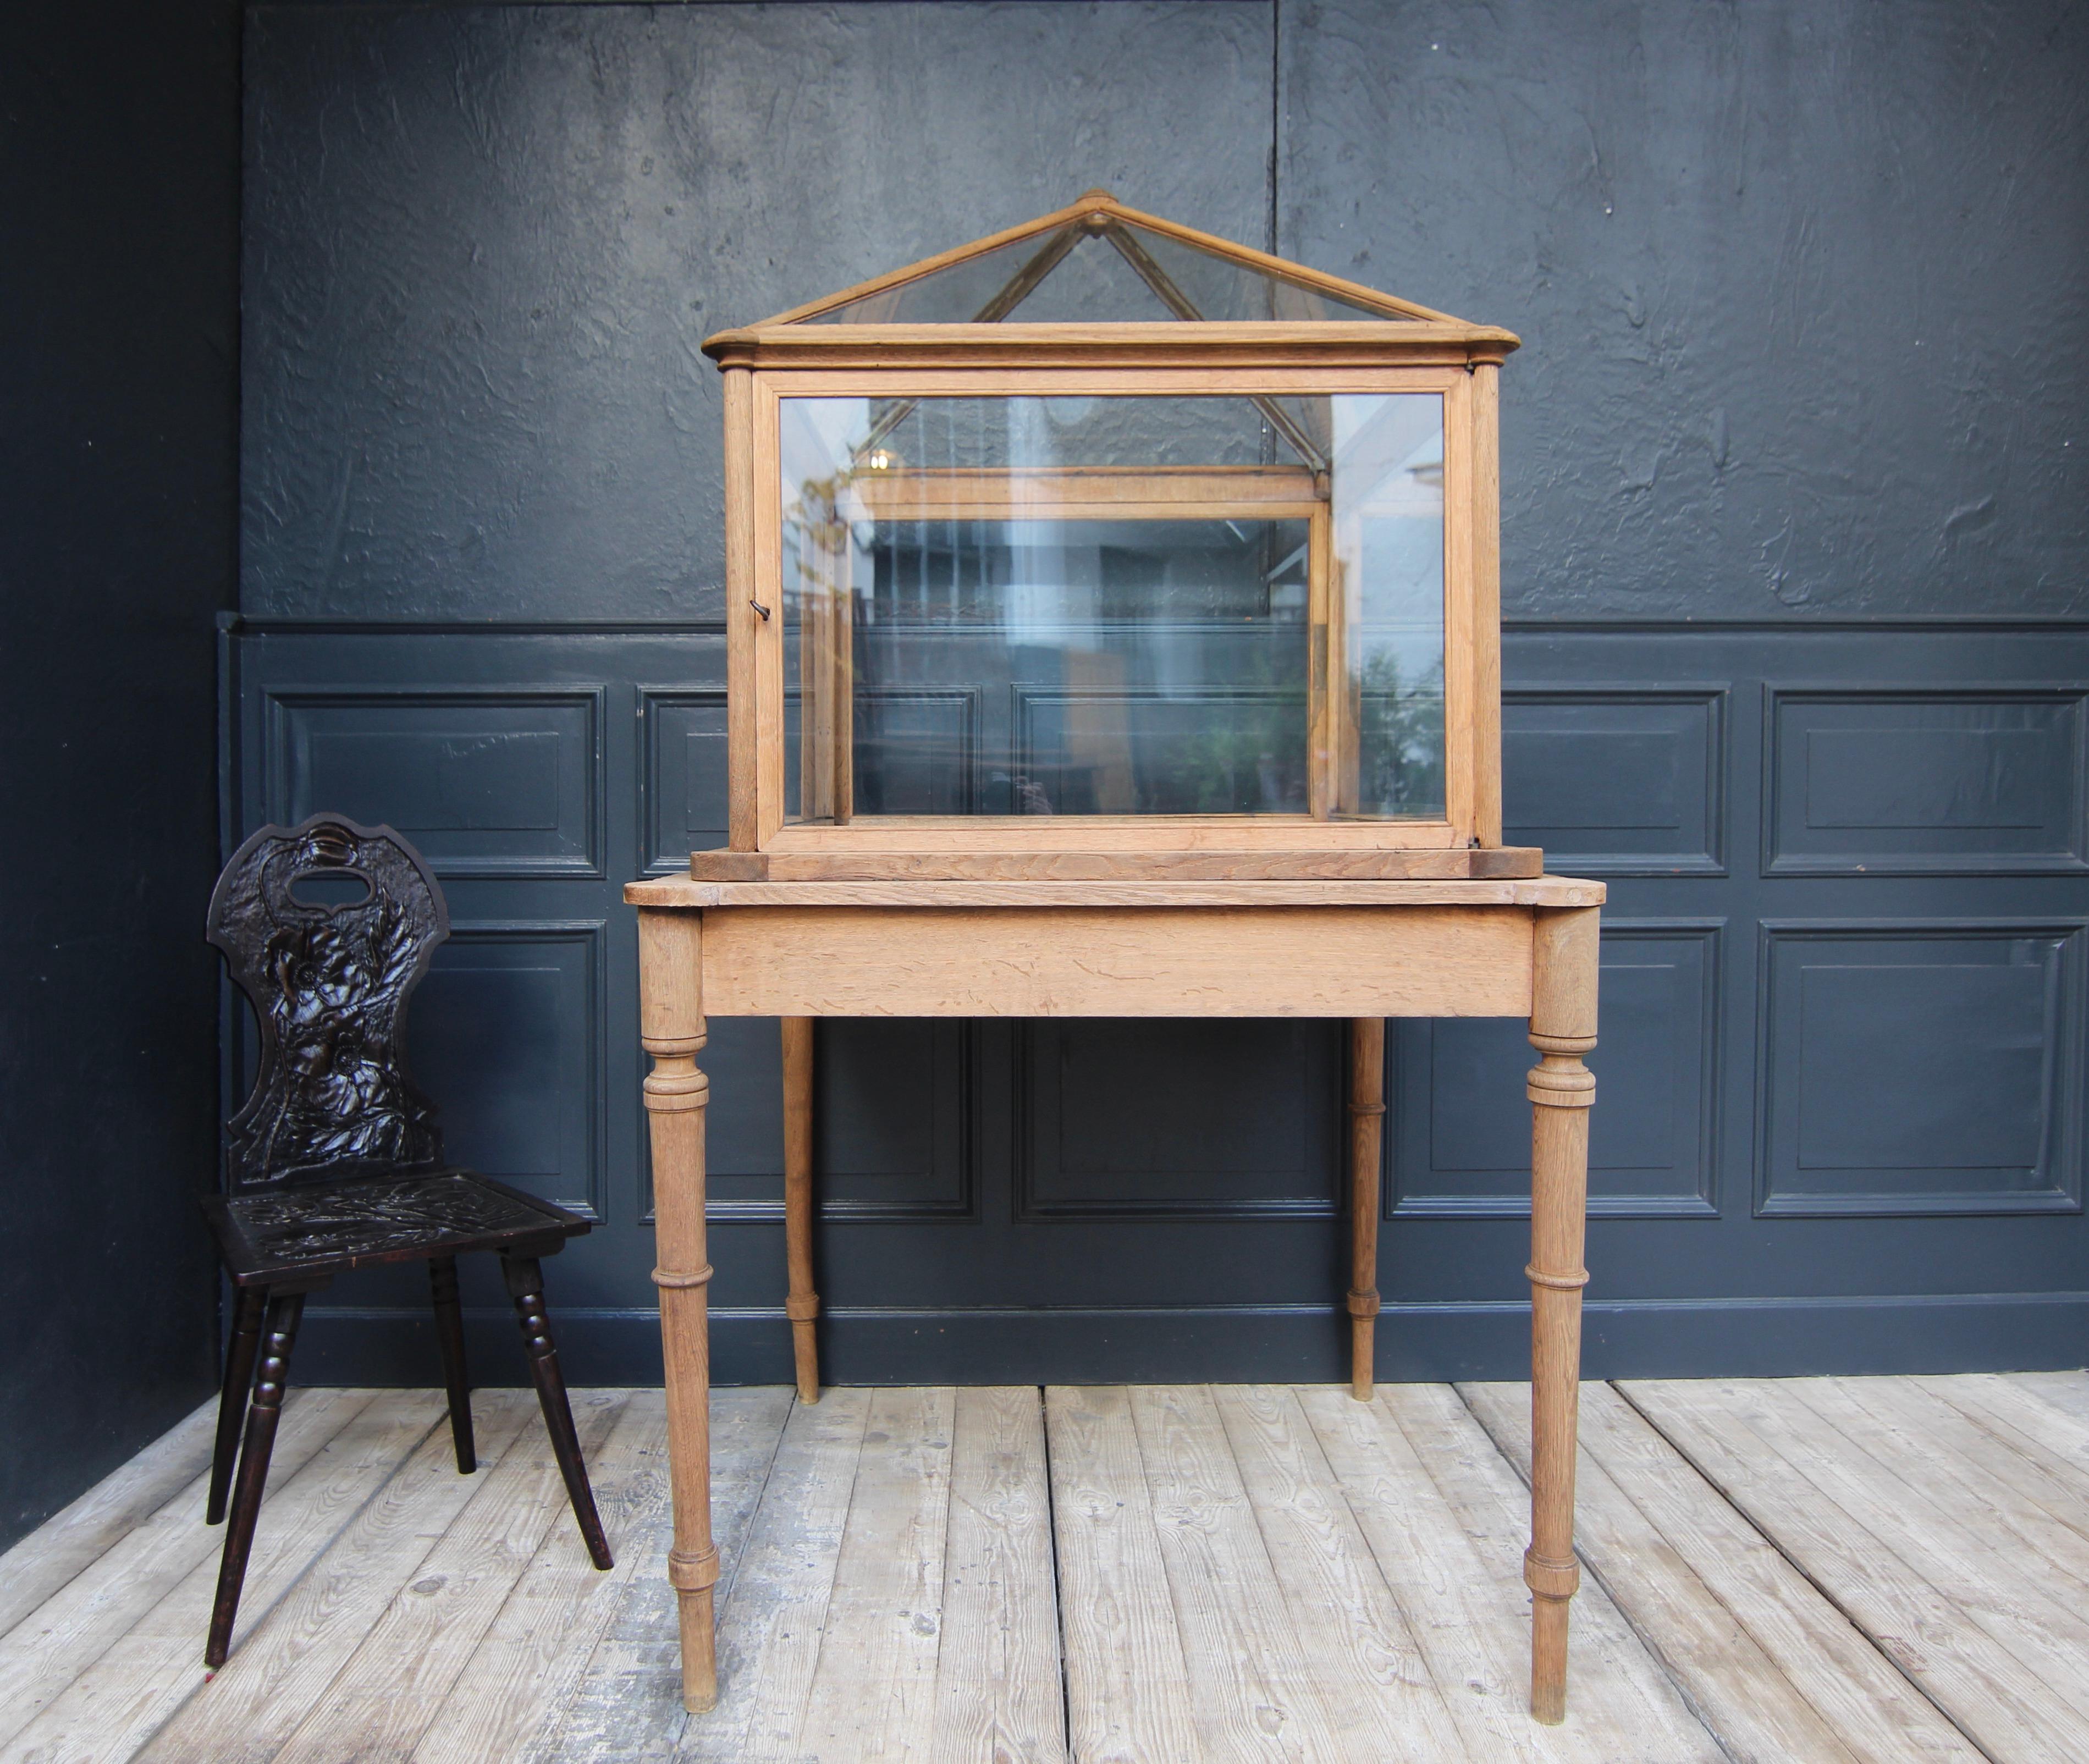 Unique museum display case from around 1900. Solidly made of oak and glazed. 

The display case with square ground plan rests on a table frame with 4 thin turned legs. The all-round glazed cuboid display case top consists of an oak frame with